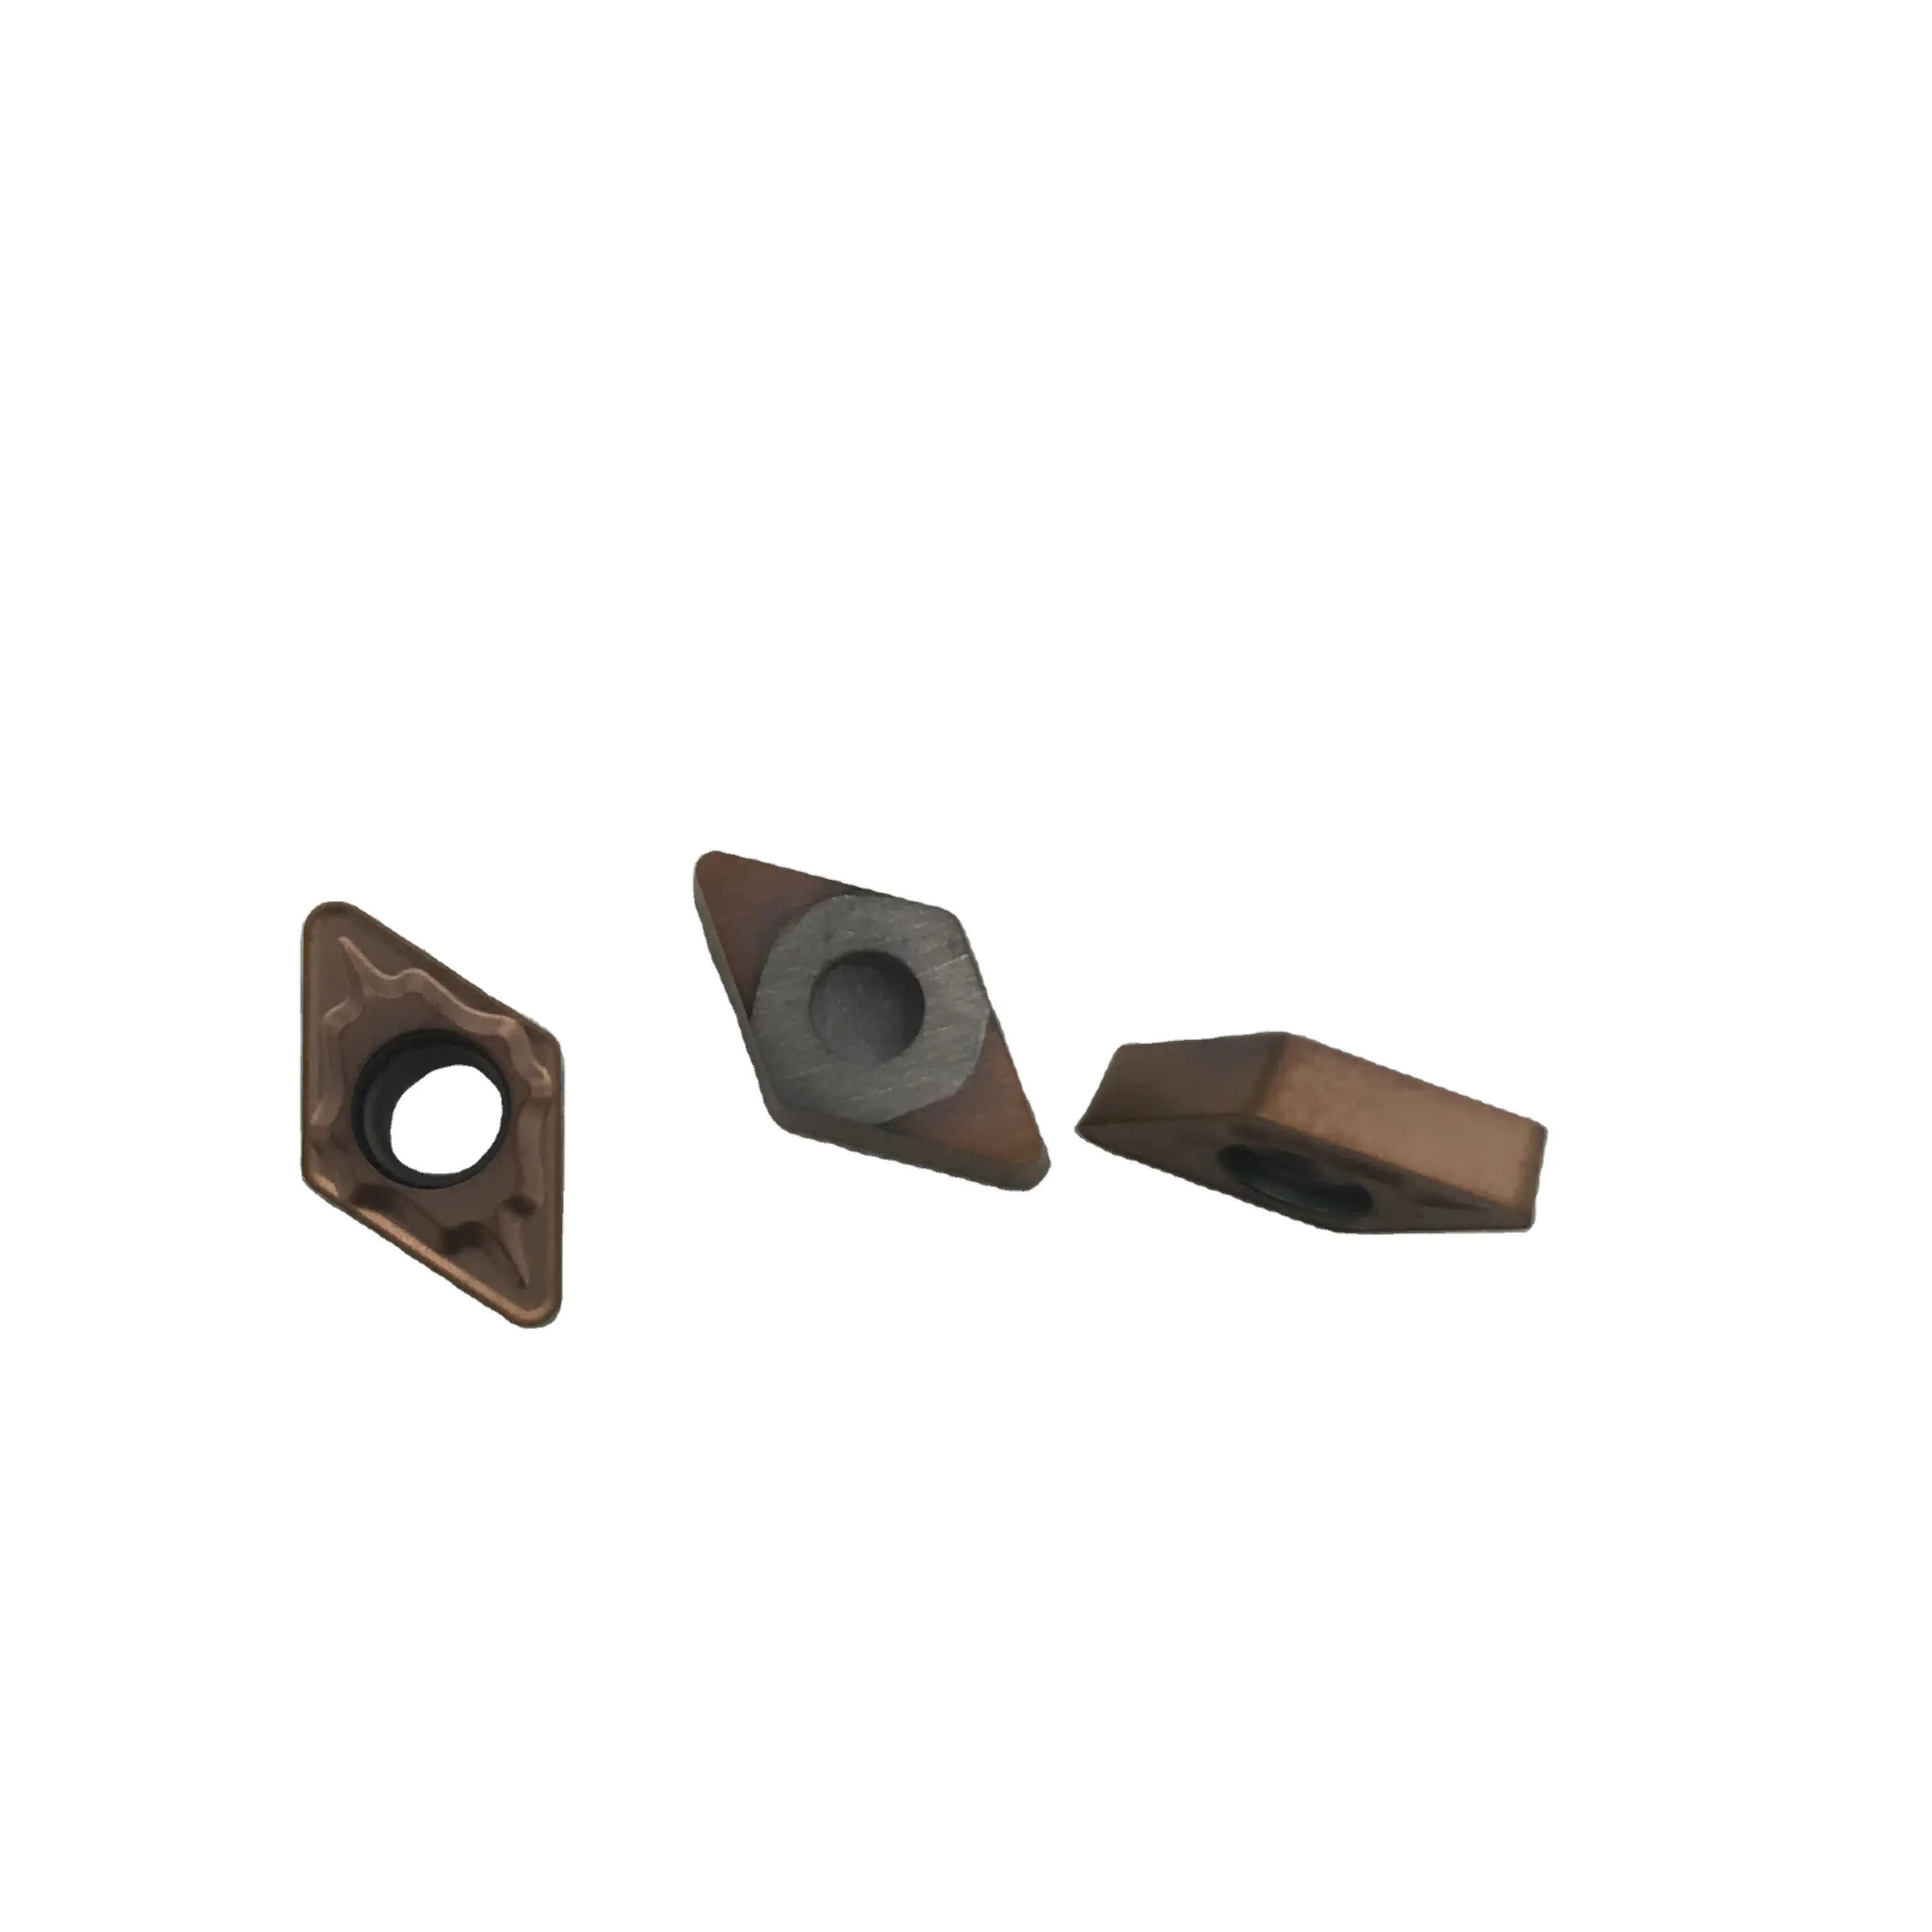 COWEE High Quality Tools CNC Machining Tool Tungsten Carbide Insert DCMT070208-GM Type